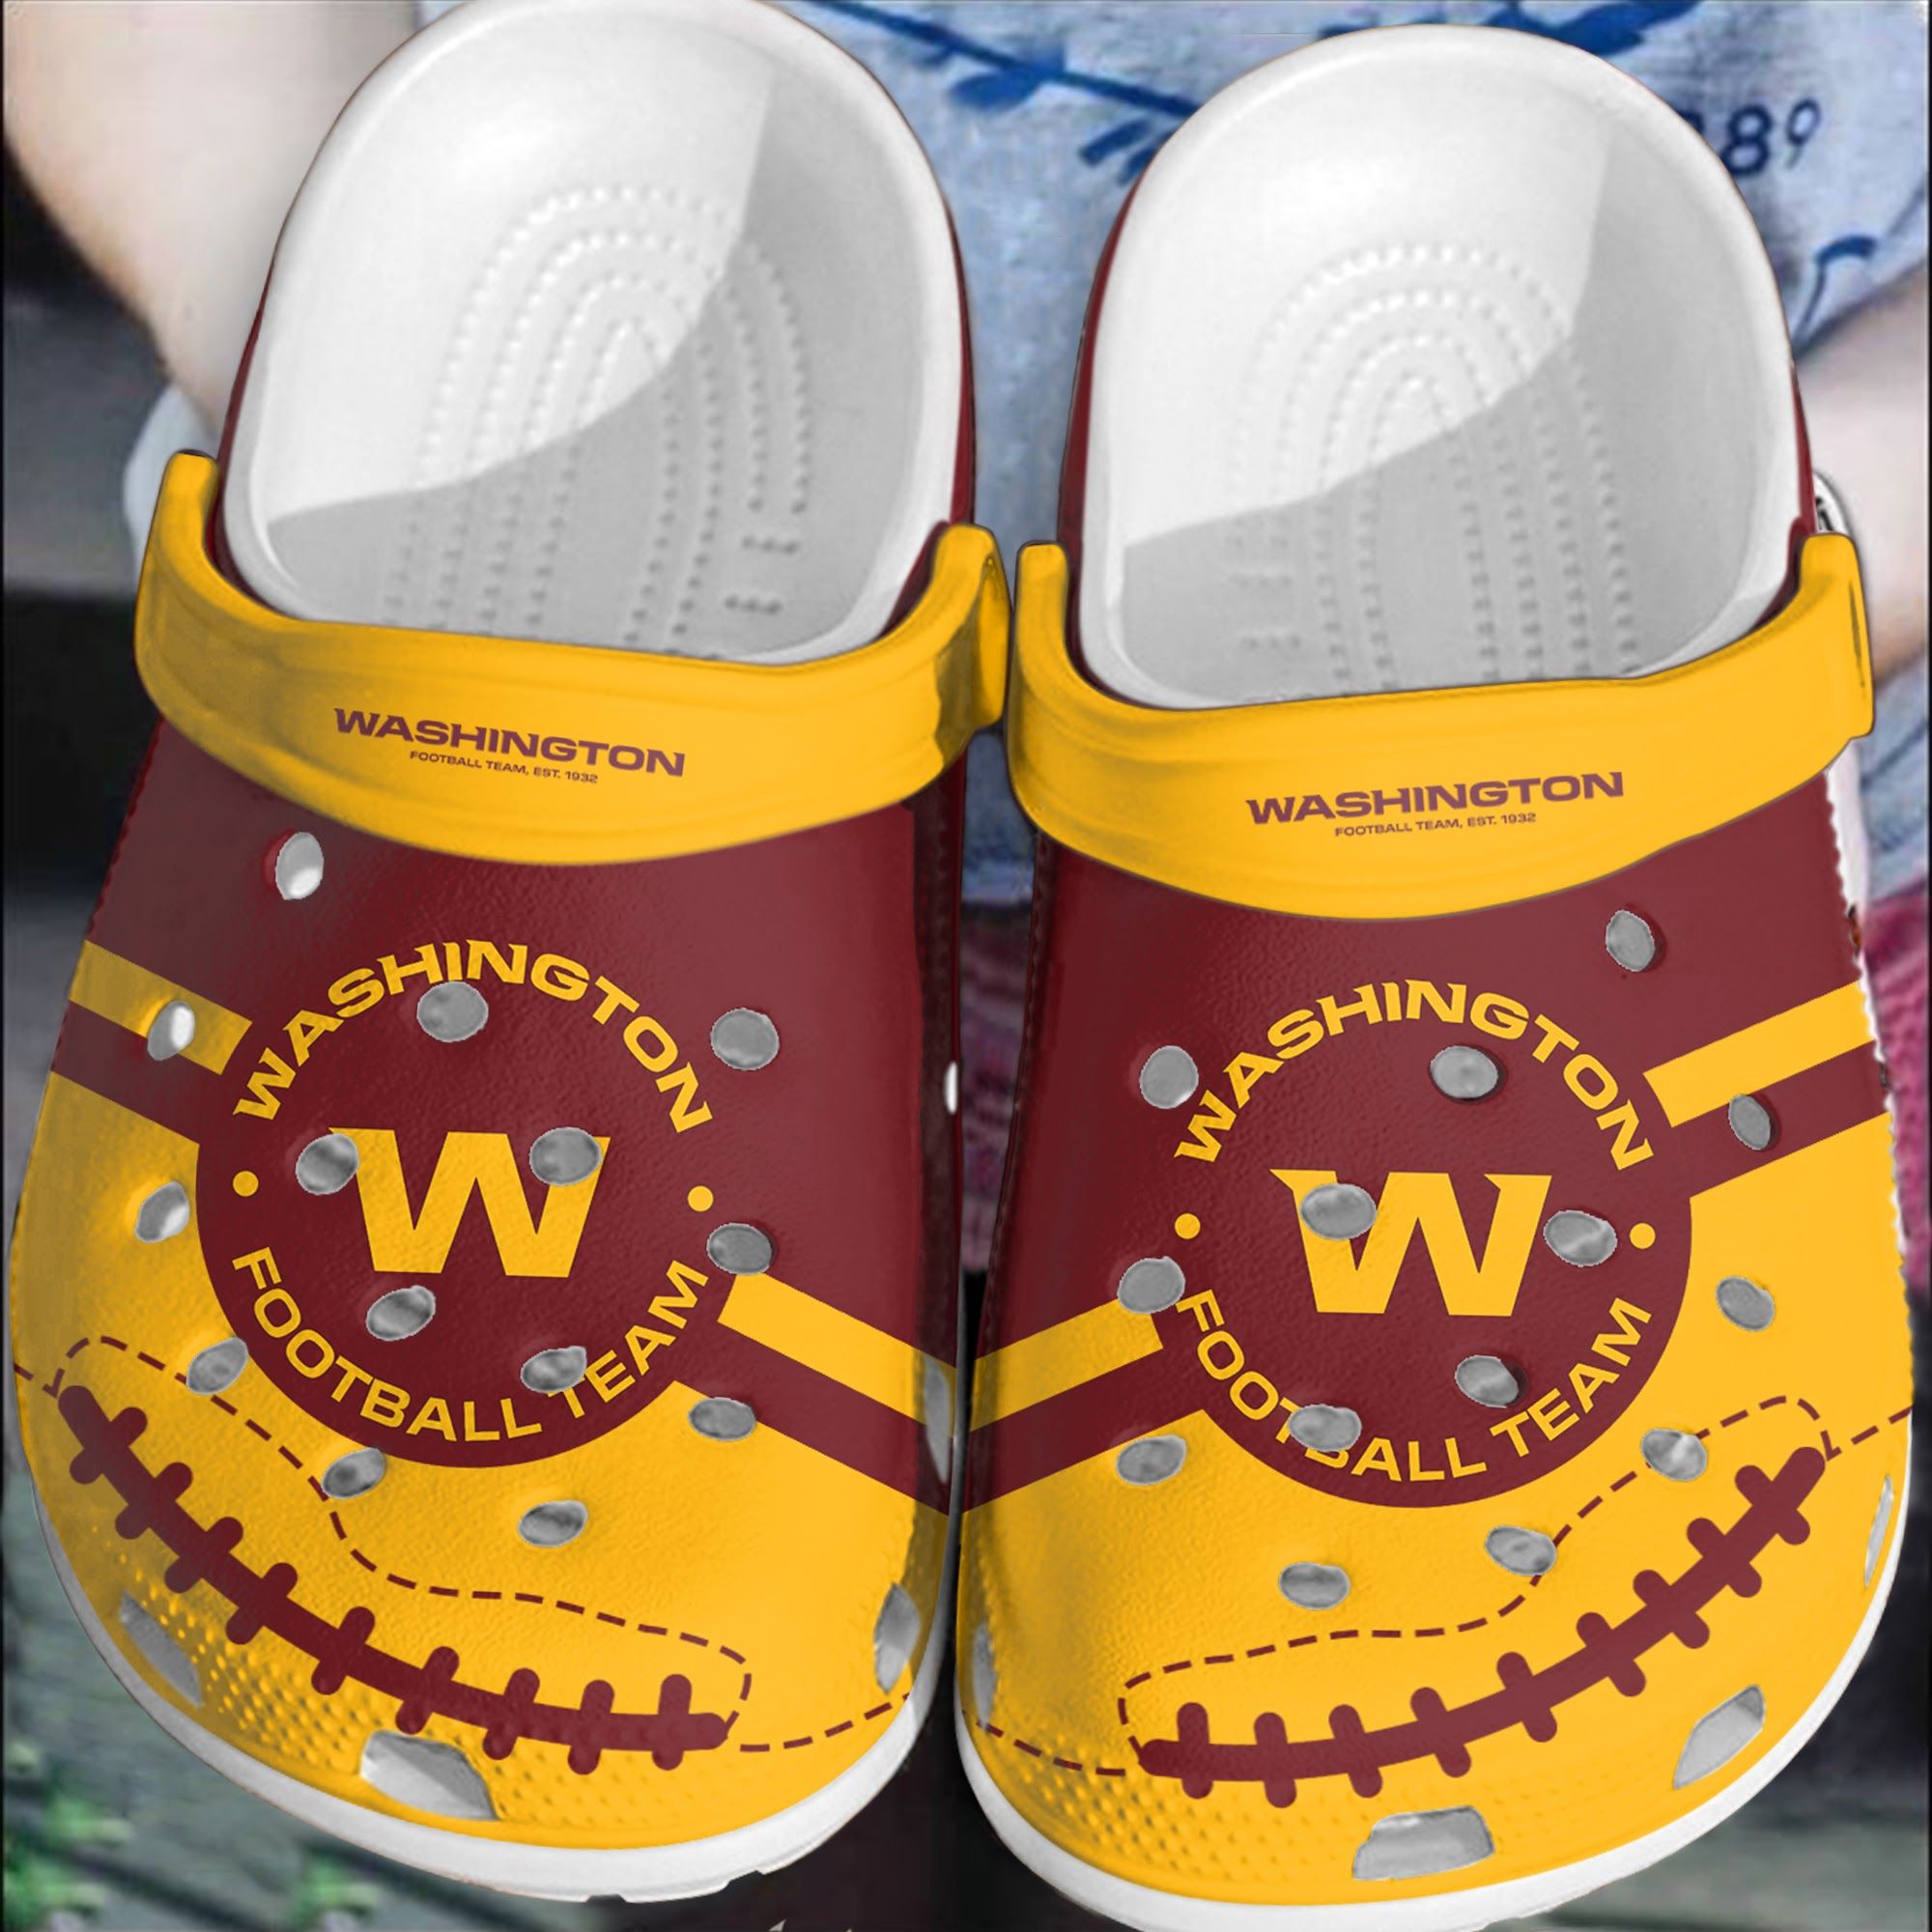 If you'd like to purchase a pair of Crocband Clogs, be sure to check out the official website. 223